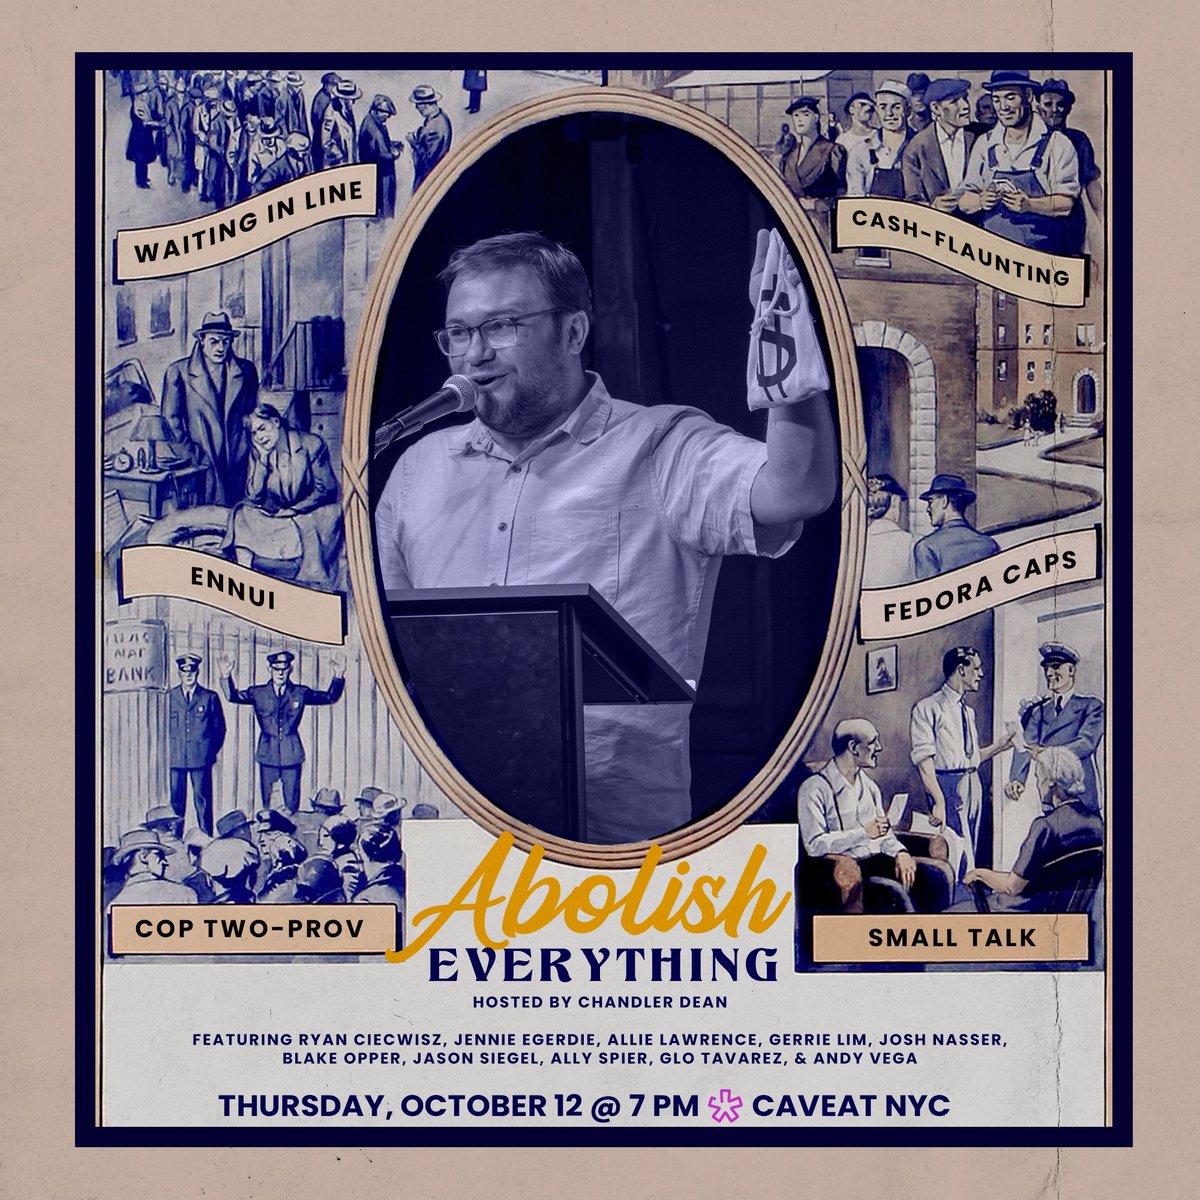 Abolish Everything is BACK Thursday 10/12 @caveatnyc! Come see the funnest, dumbest comedy debate show with a killer lineup of monologists & panelists. Get $5 off with early bird tix before 10/5. And get ANOTHER $5 with promo code abolishchandler! caveat.nyc/events/abolish…